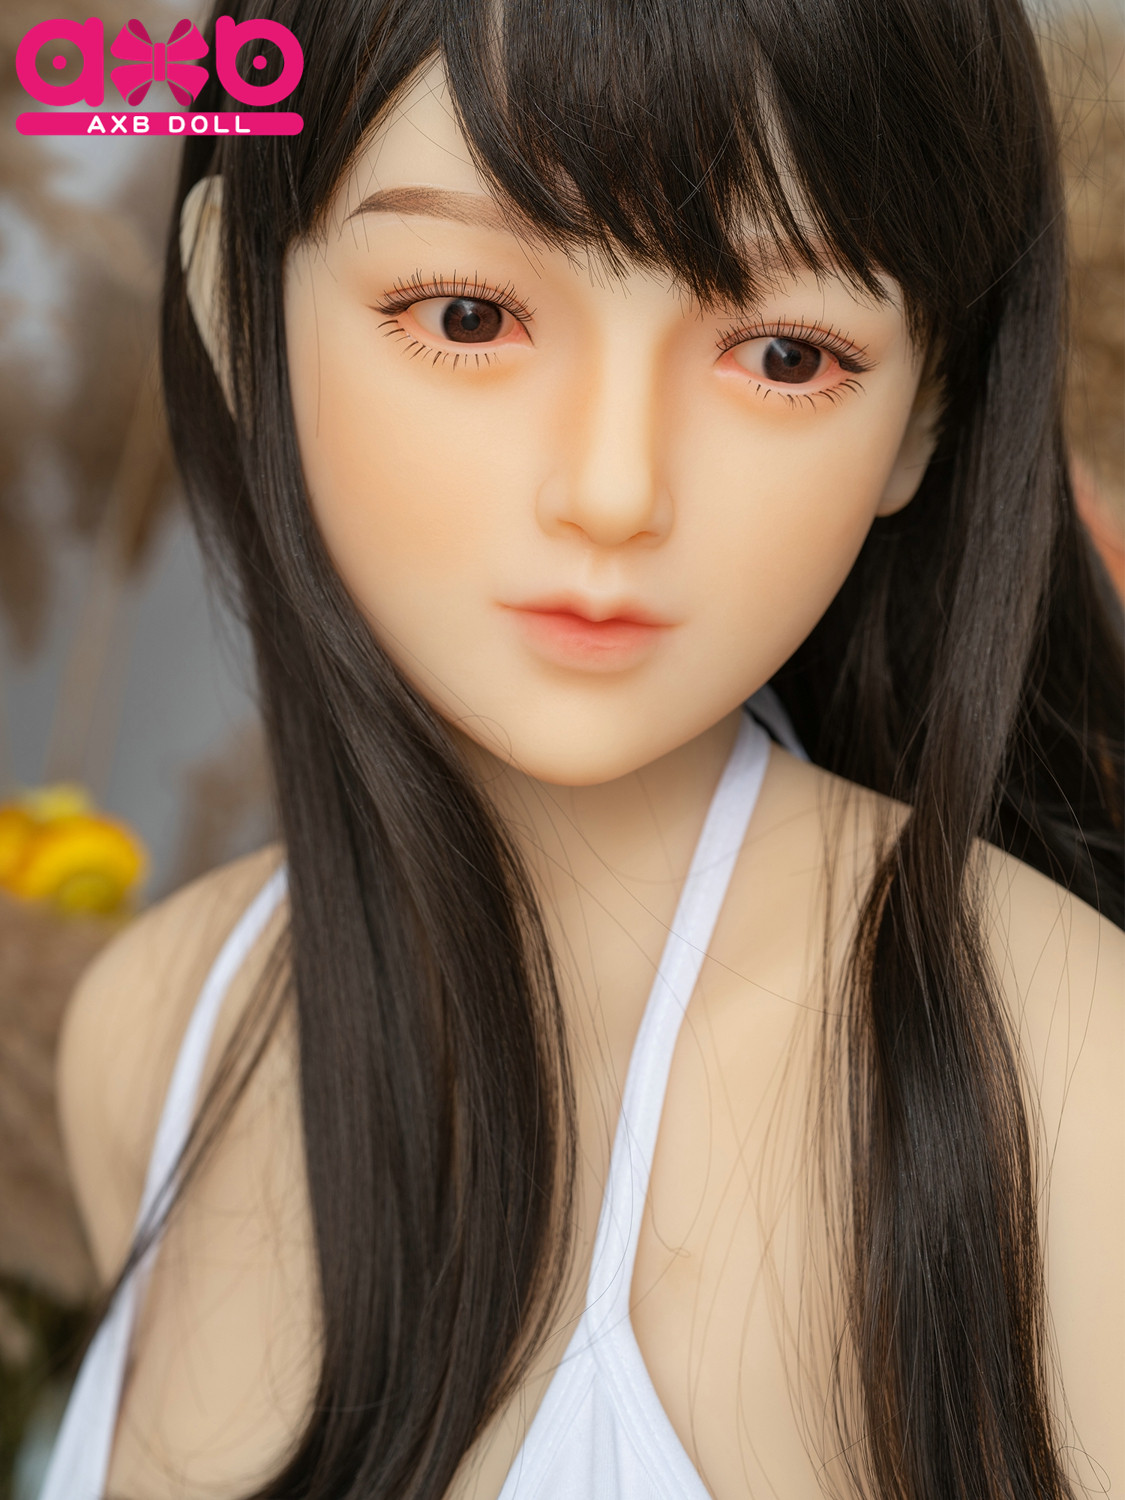 AXBDOLL 160cm A139# TPE AnimeLove Doll Life Size Sex Dolls - Click Image to Close